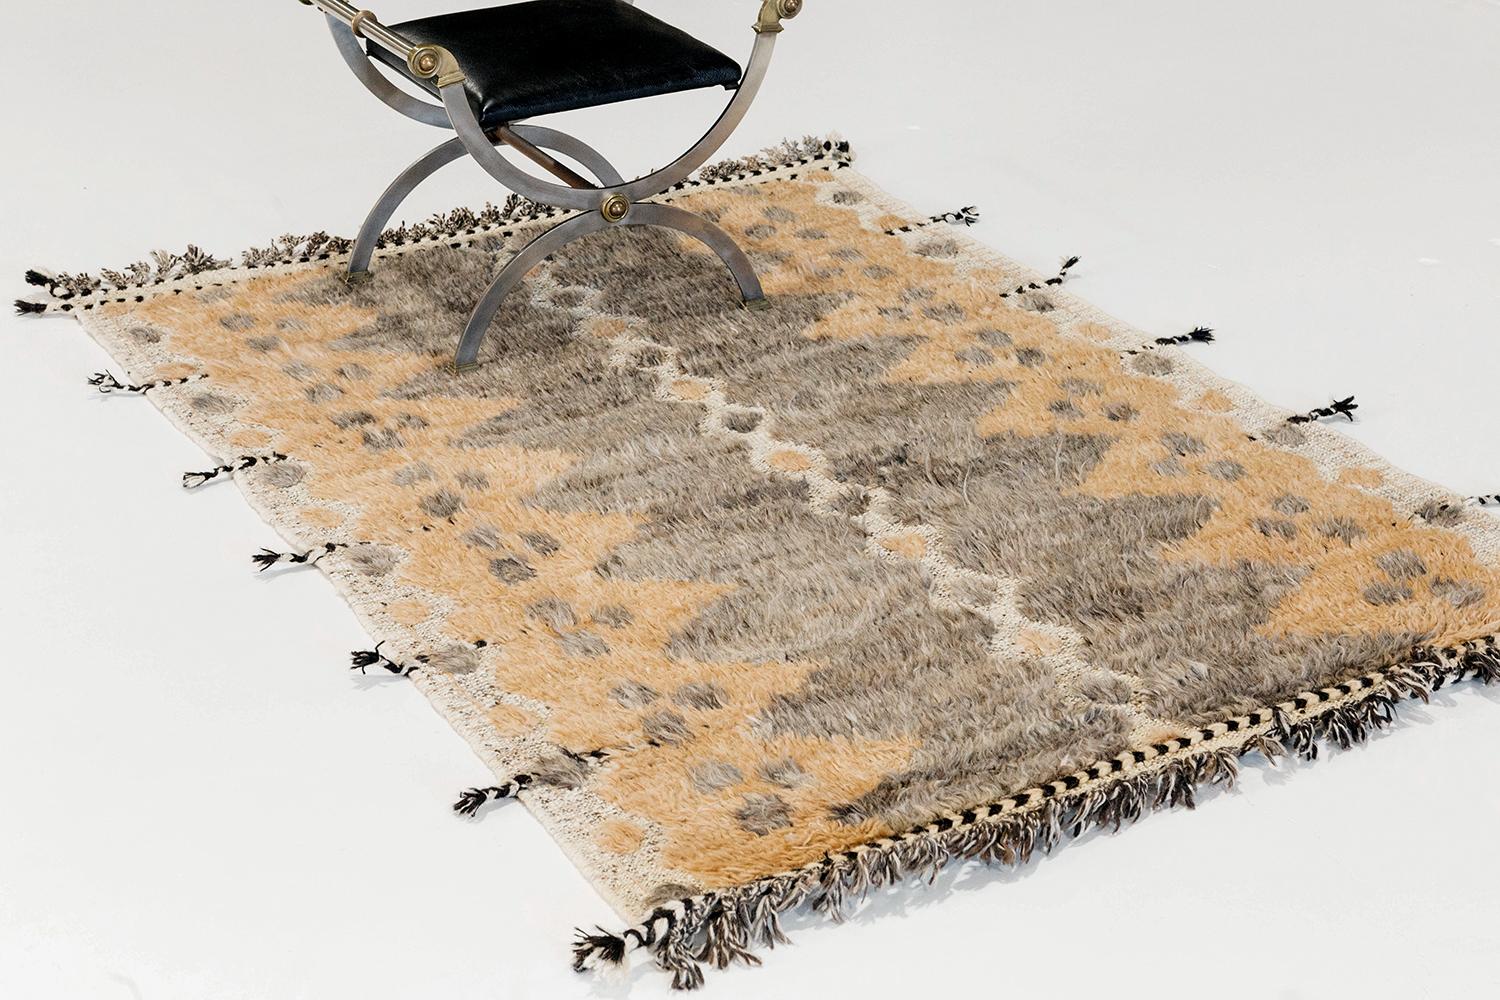 The 'Modlina' rug is a handwoven wool piece inspired by vintage Scandinavian design elements and recreated for the modern design world. The rug's shag balance and harmony, handwoven with a neutral flat-weave and unique piles of peach and natural